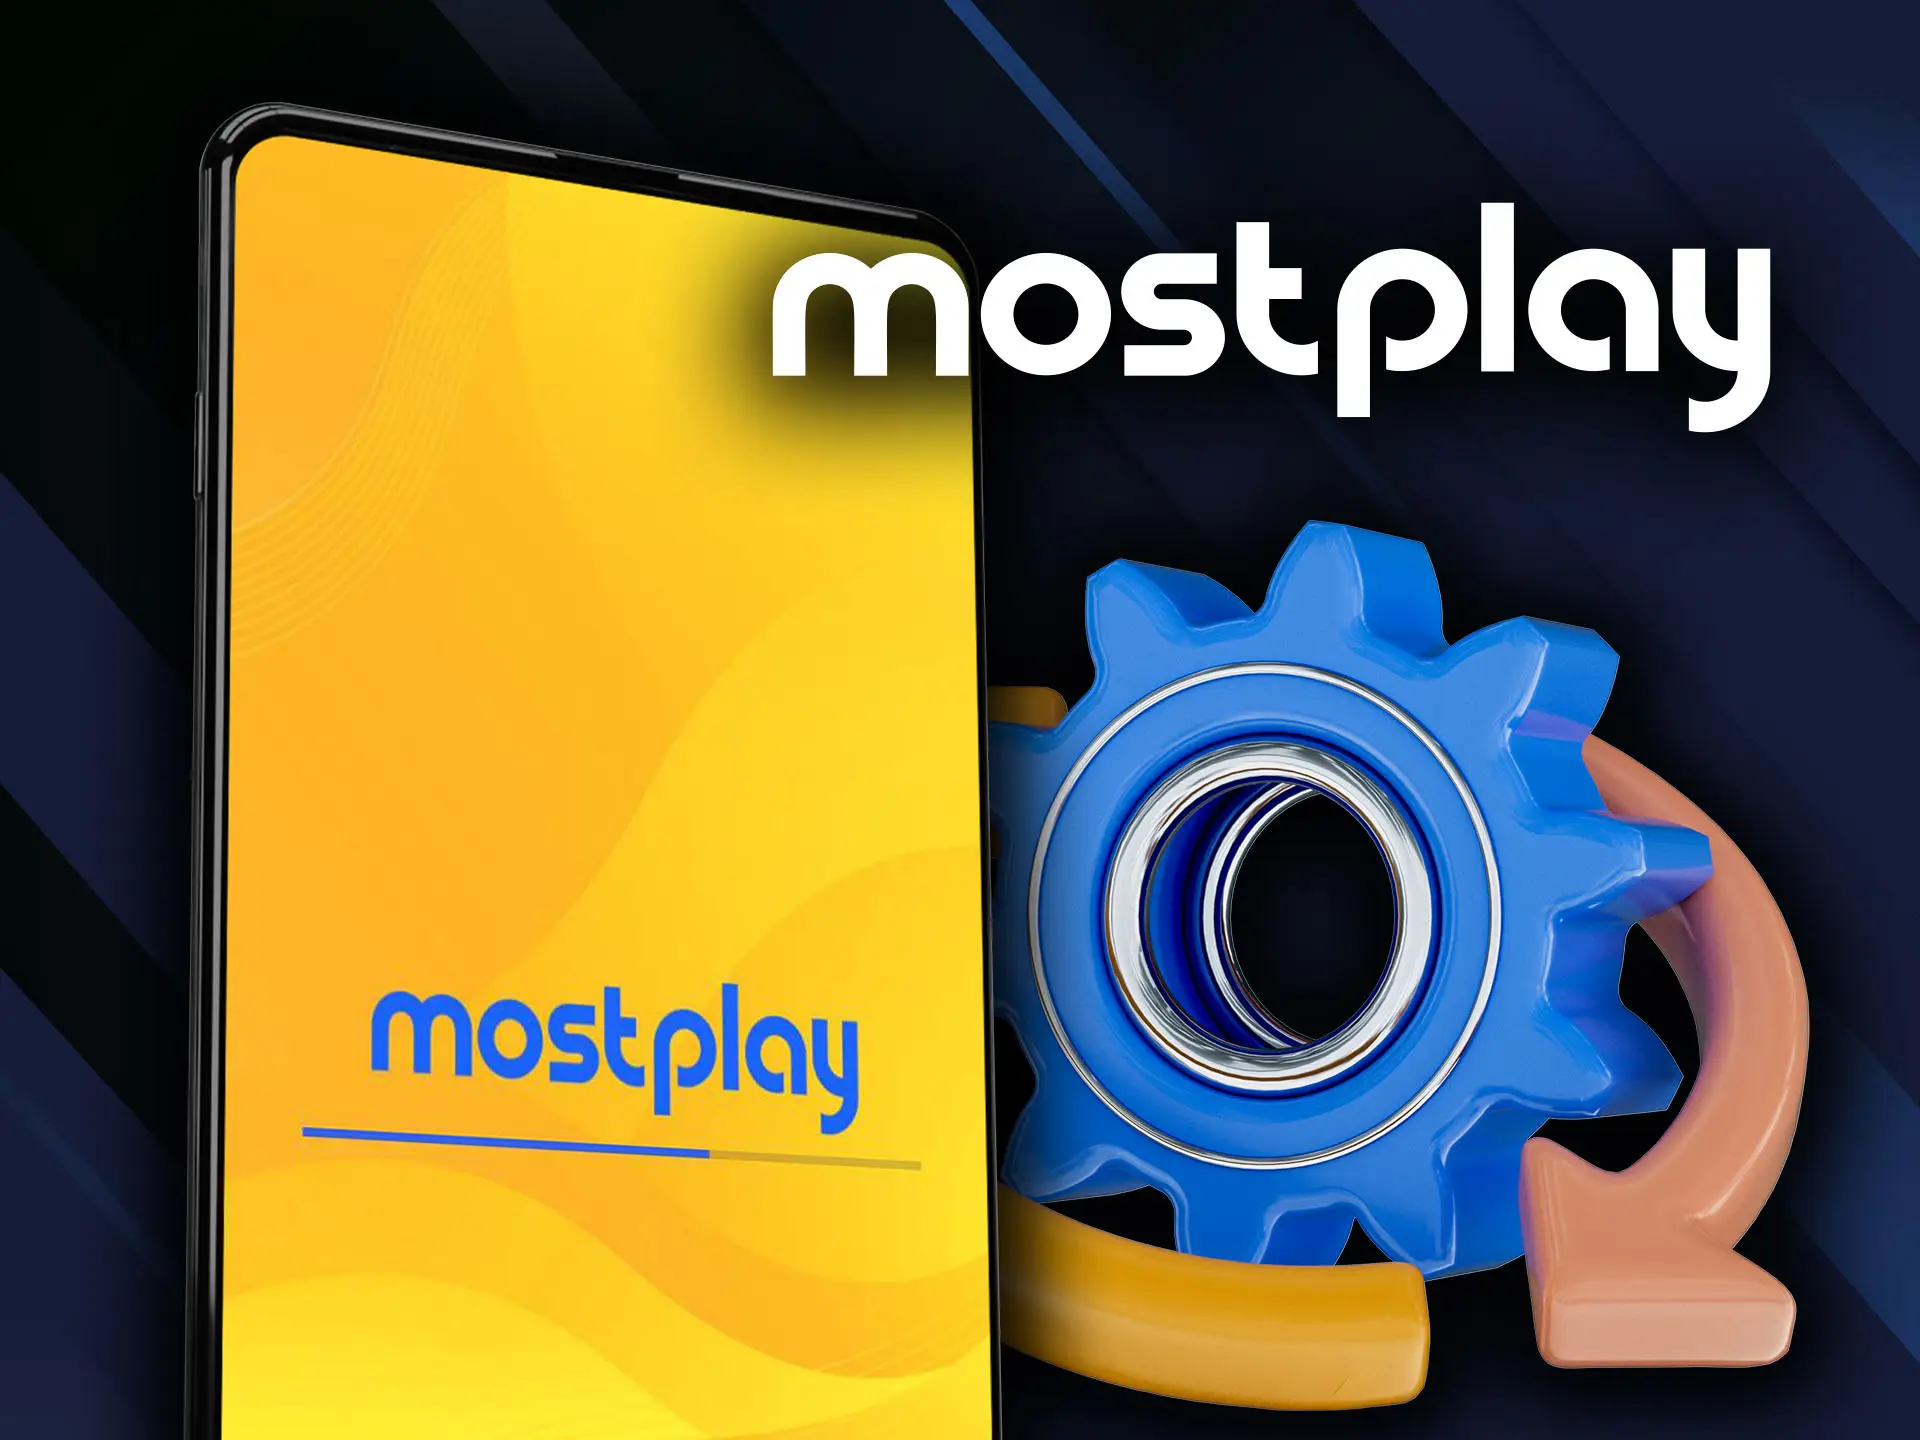 Mostplay app updates automatically after each signing in.